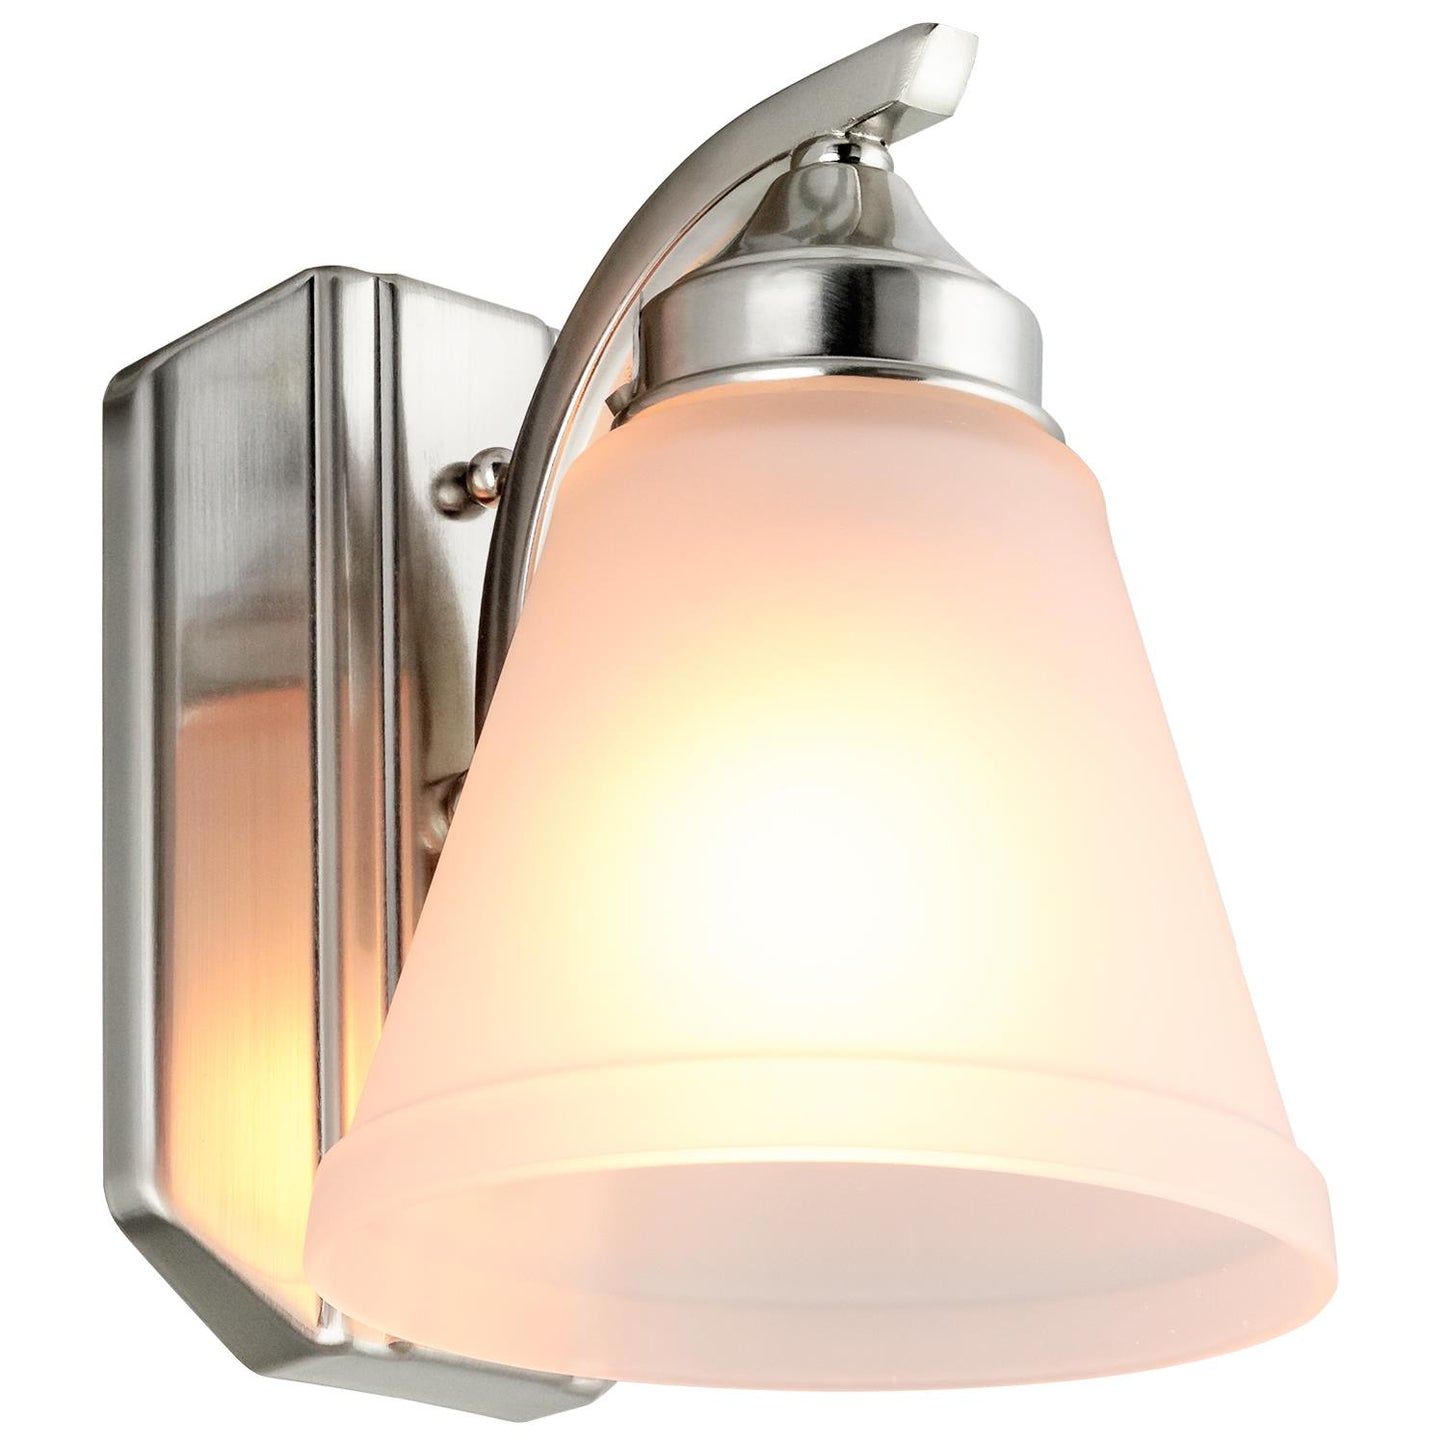 Sunlite 45055-SU Vanity Fixture One Light 8 Inch, Bell Shaped Frosted Glass , Brushed Nickel Finish